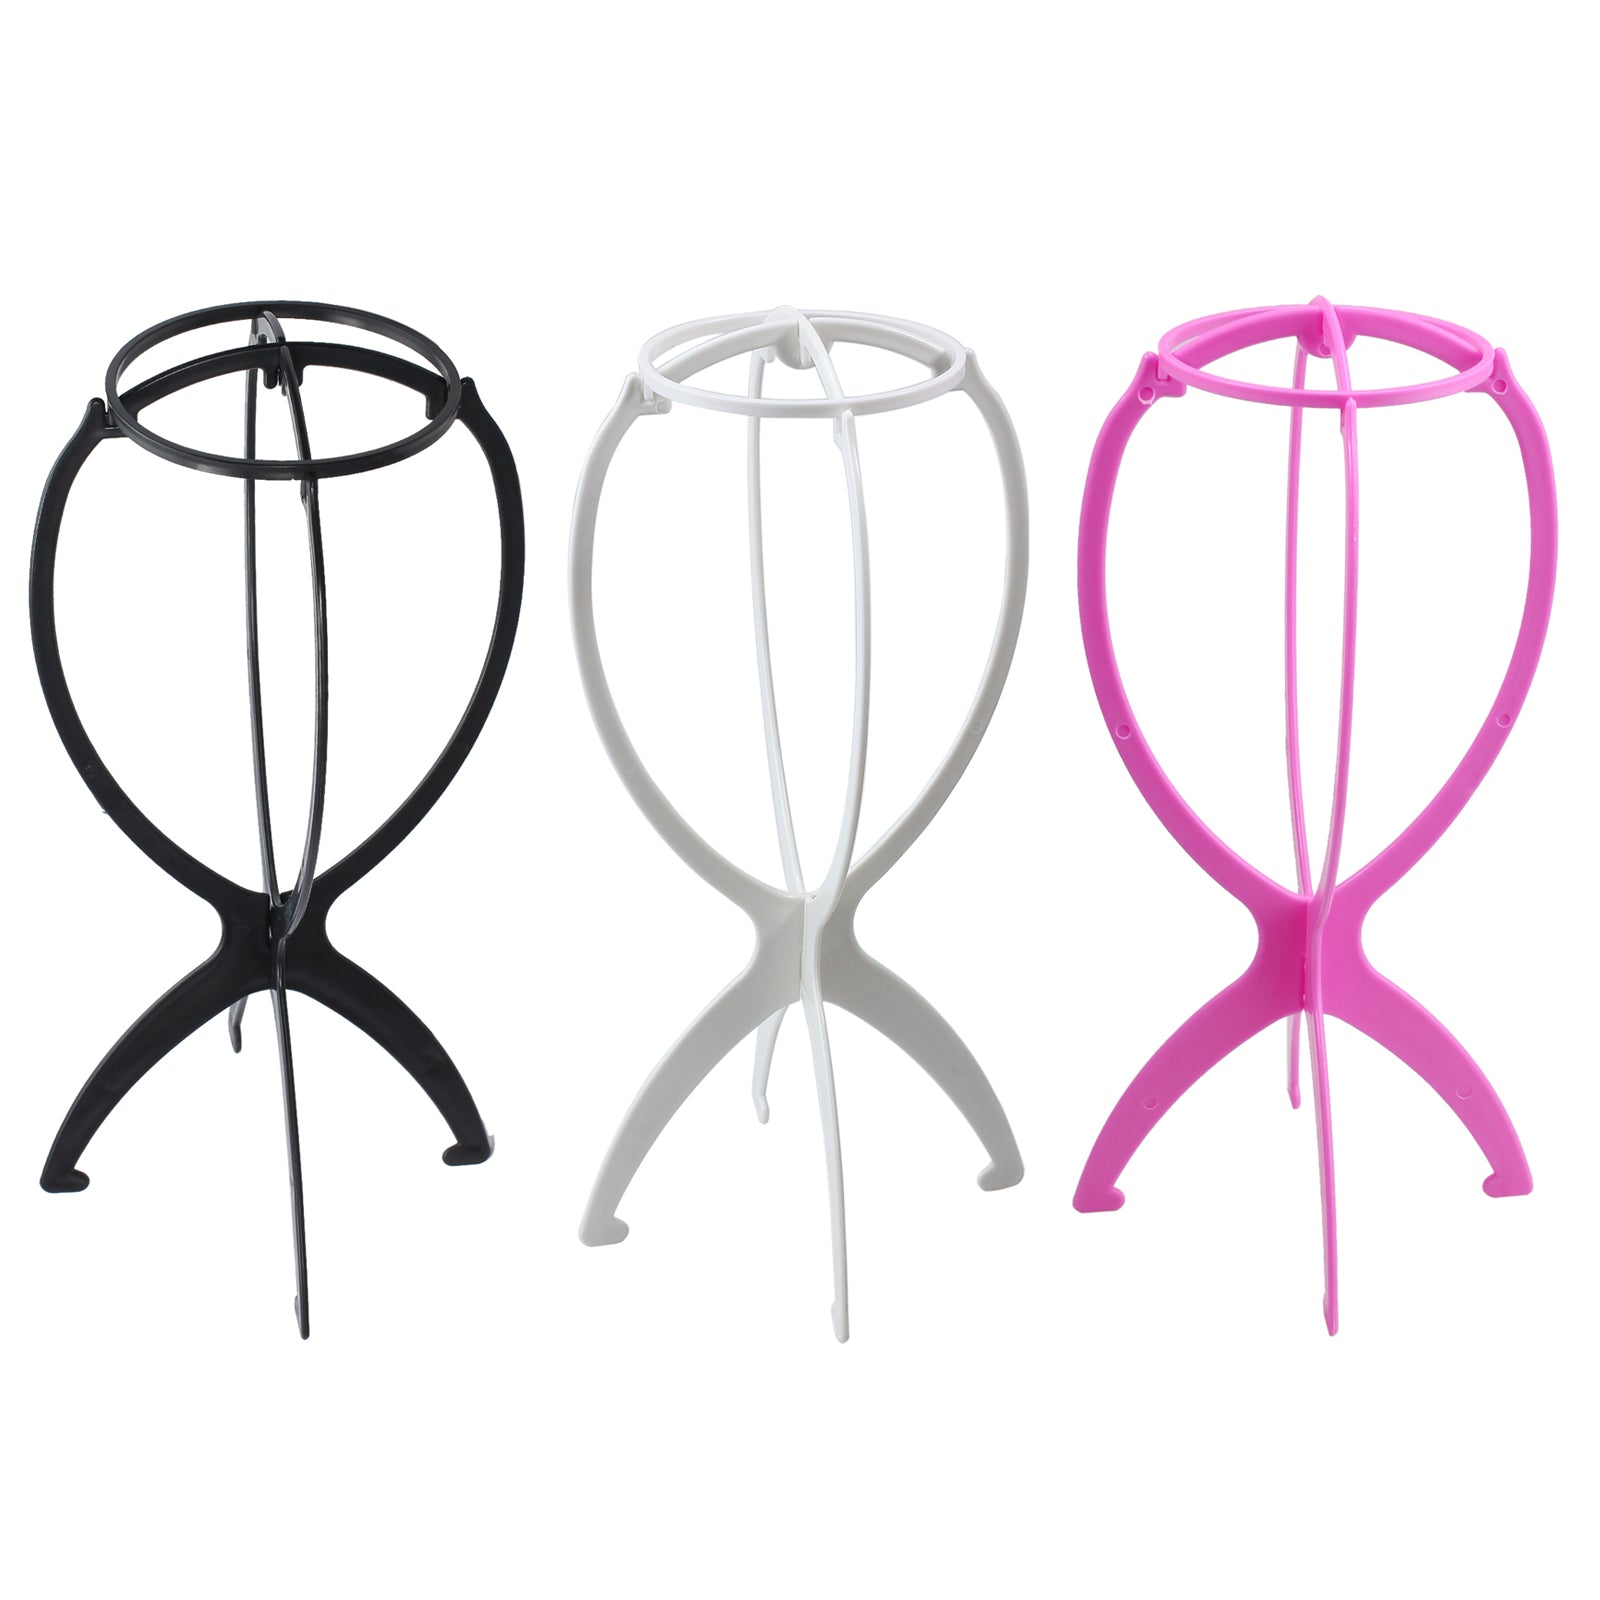 Collapsible wig stand